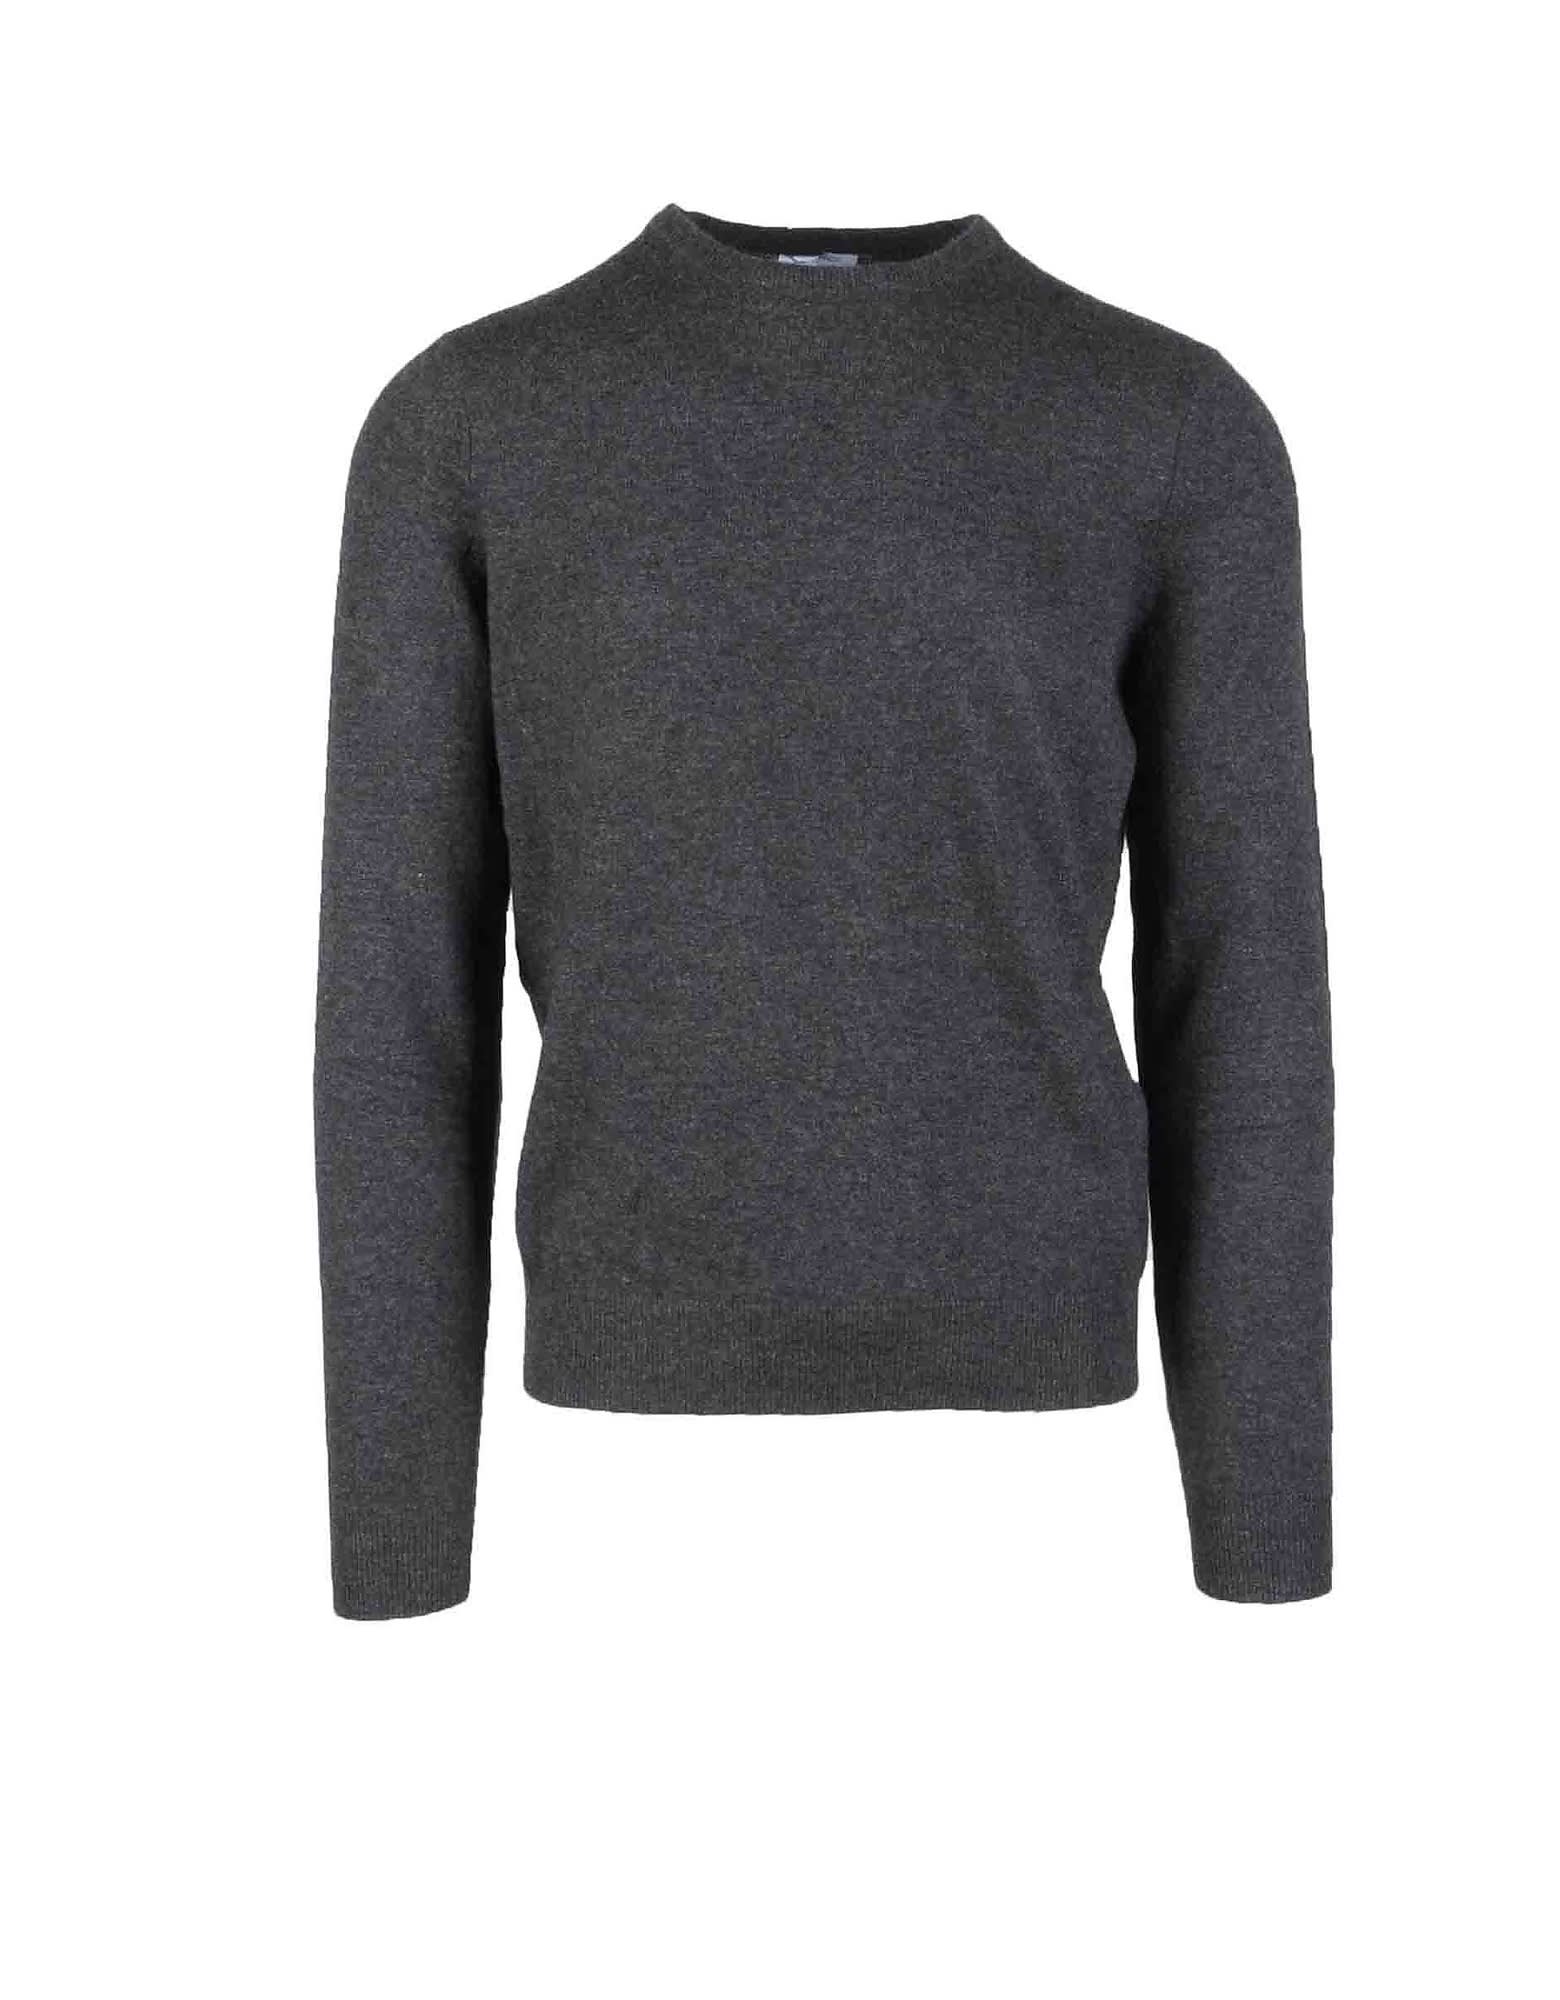 Mens Anthracite Sweater